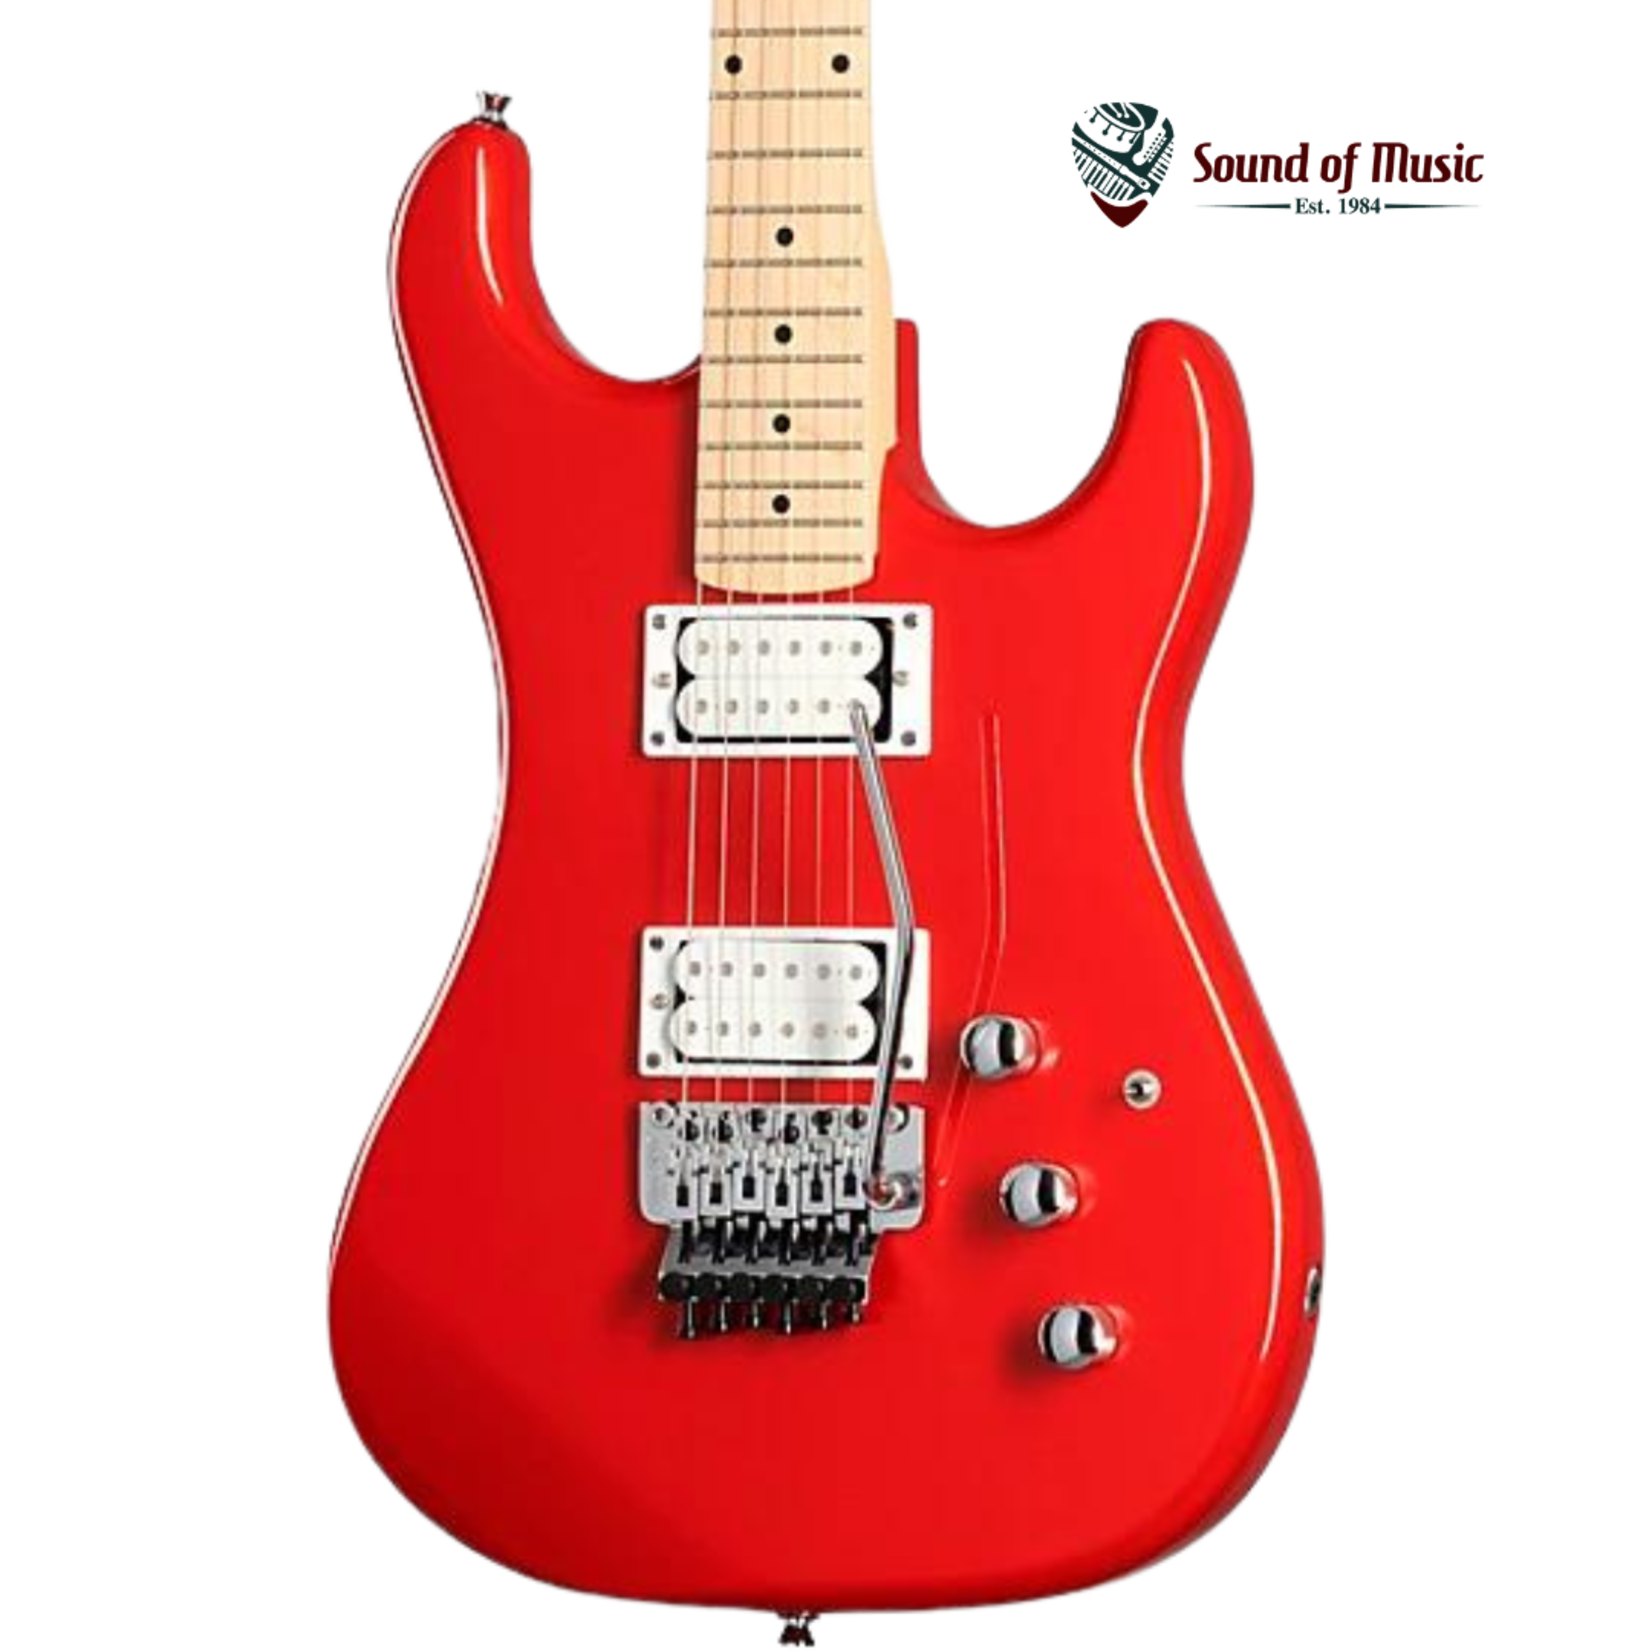 Kramer Pacer Classic Scarlet Red Metallic - Mint Condition